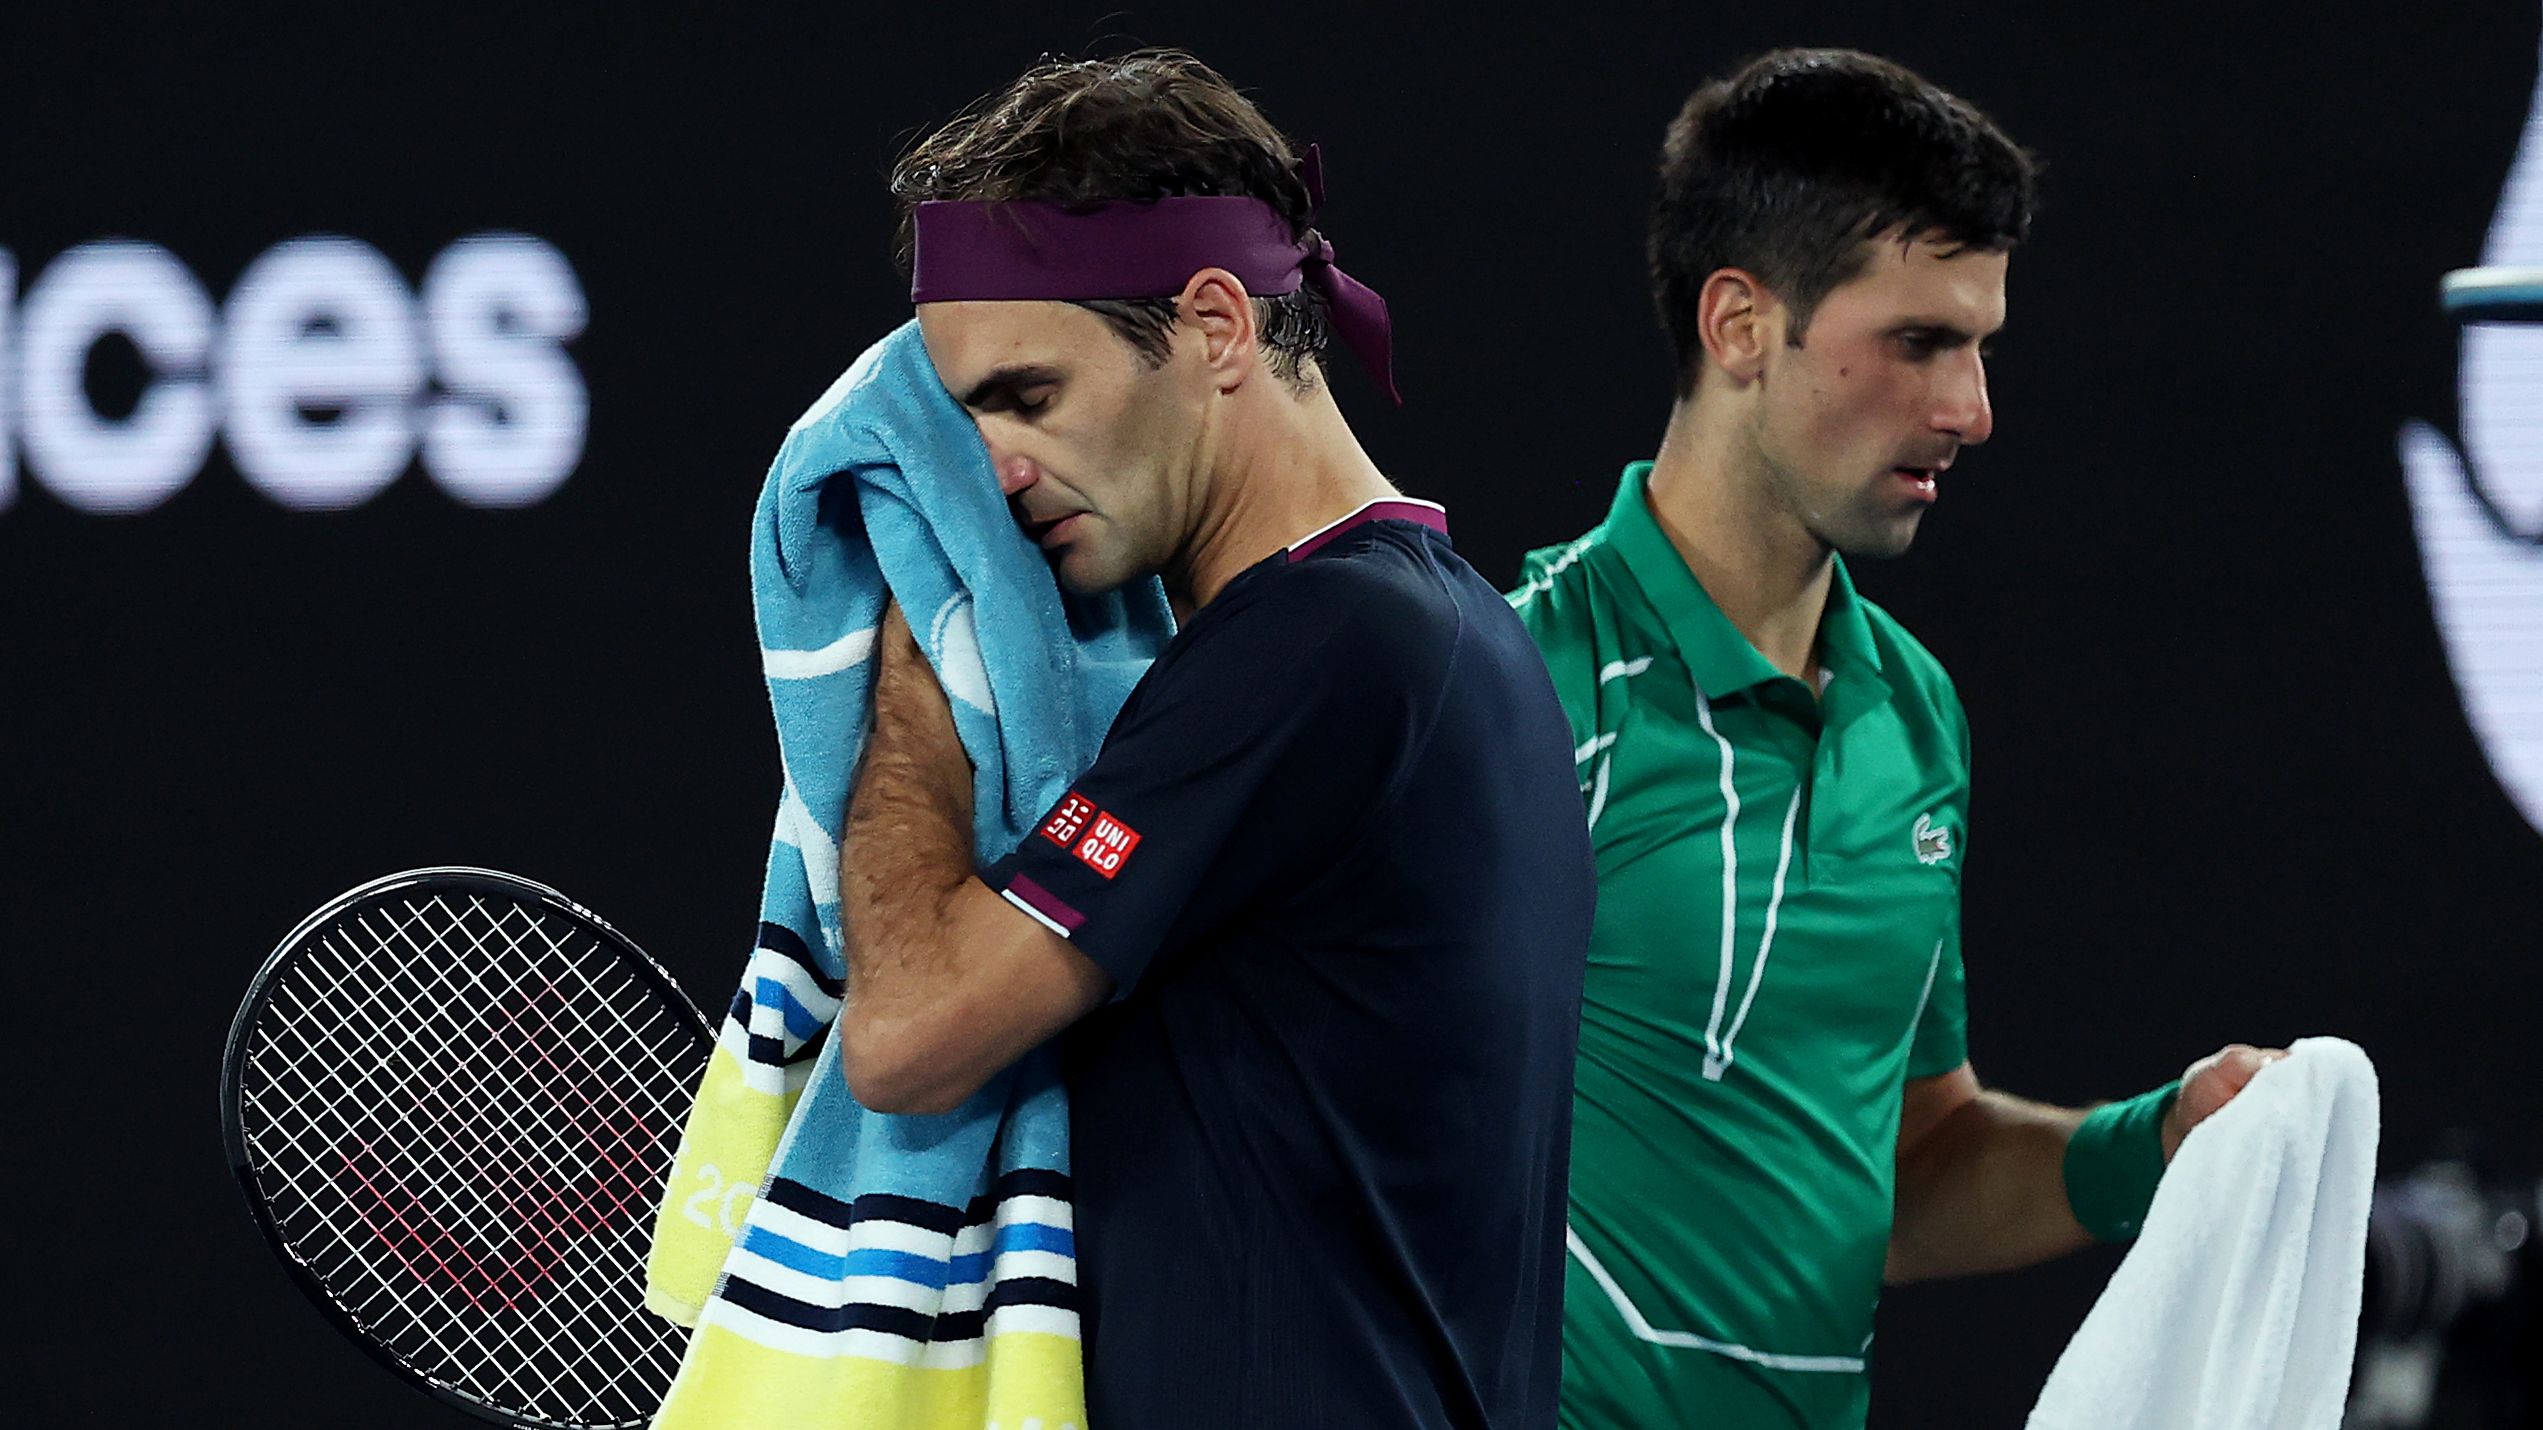 'Didn't sit with him well': Djokovic reveals uncomfortable truth about Federer relationship 